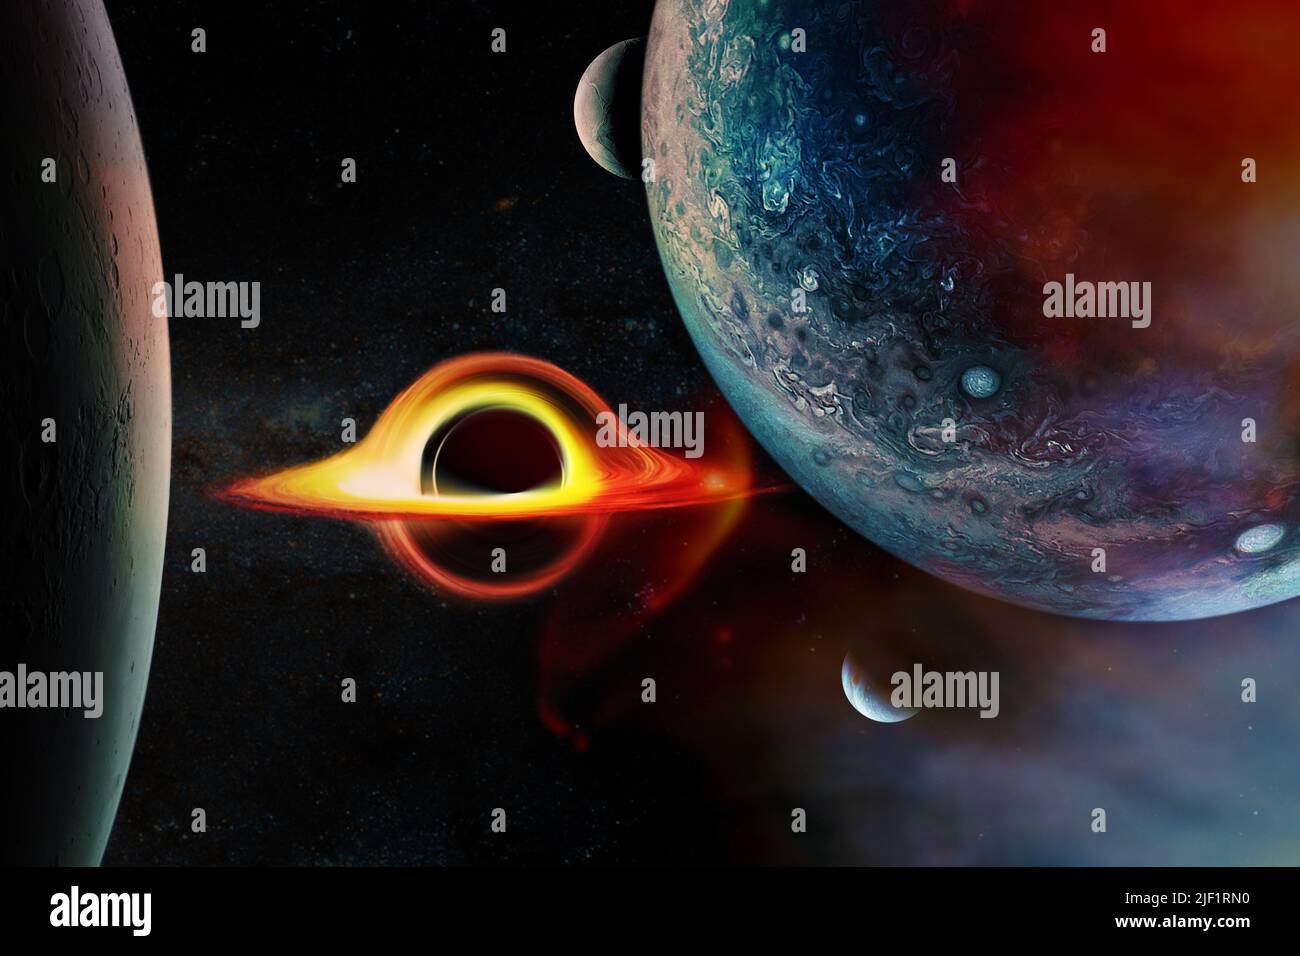 Black hole with alient planets in deep space. Elements of this image furnished by NASA. Stock Photo